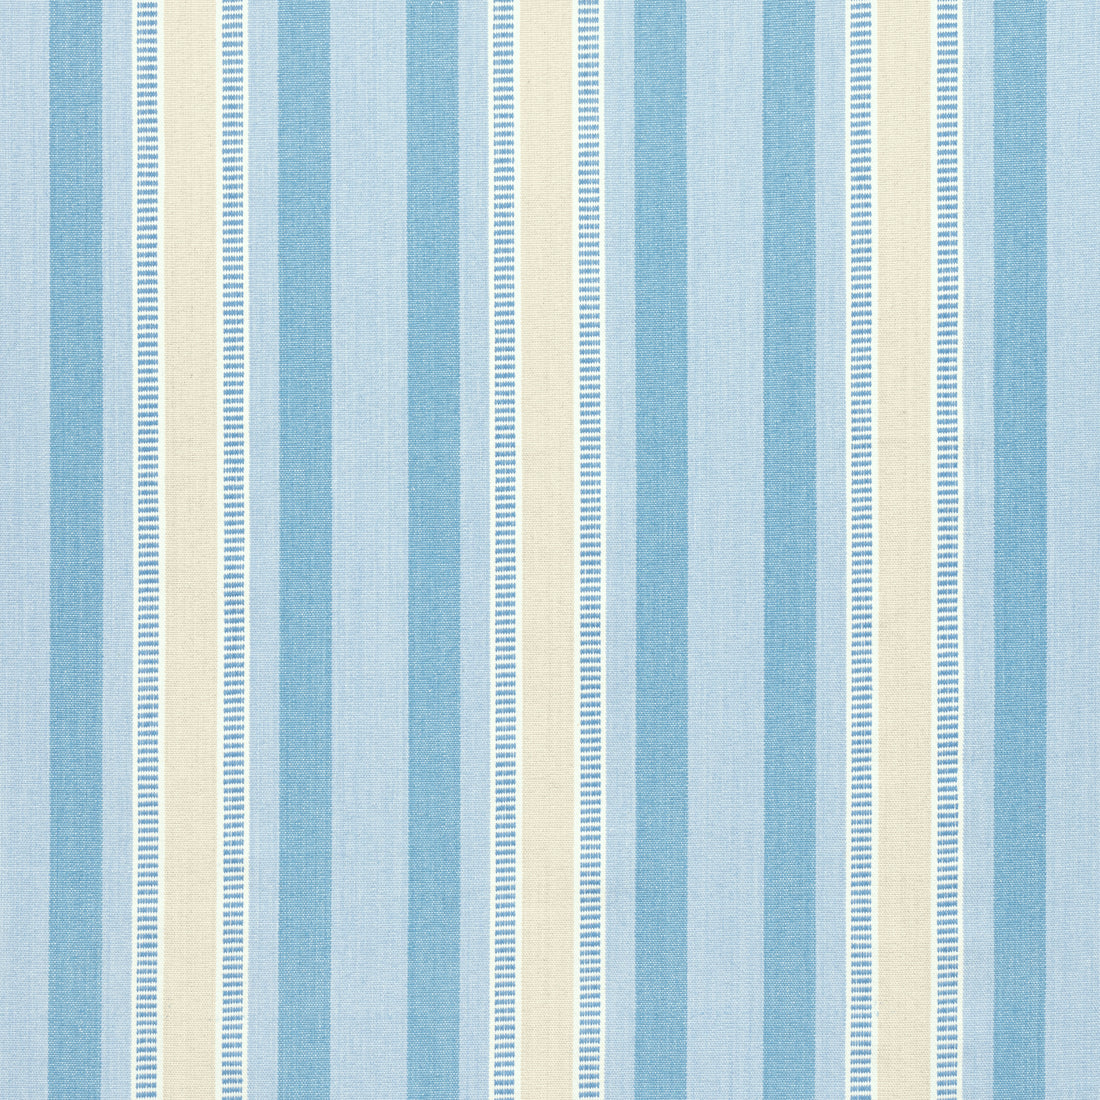 Dearden Stripe fabric in soft blue and beige color - pattern number AW23154 - by Anna French in the Willow Tree collection